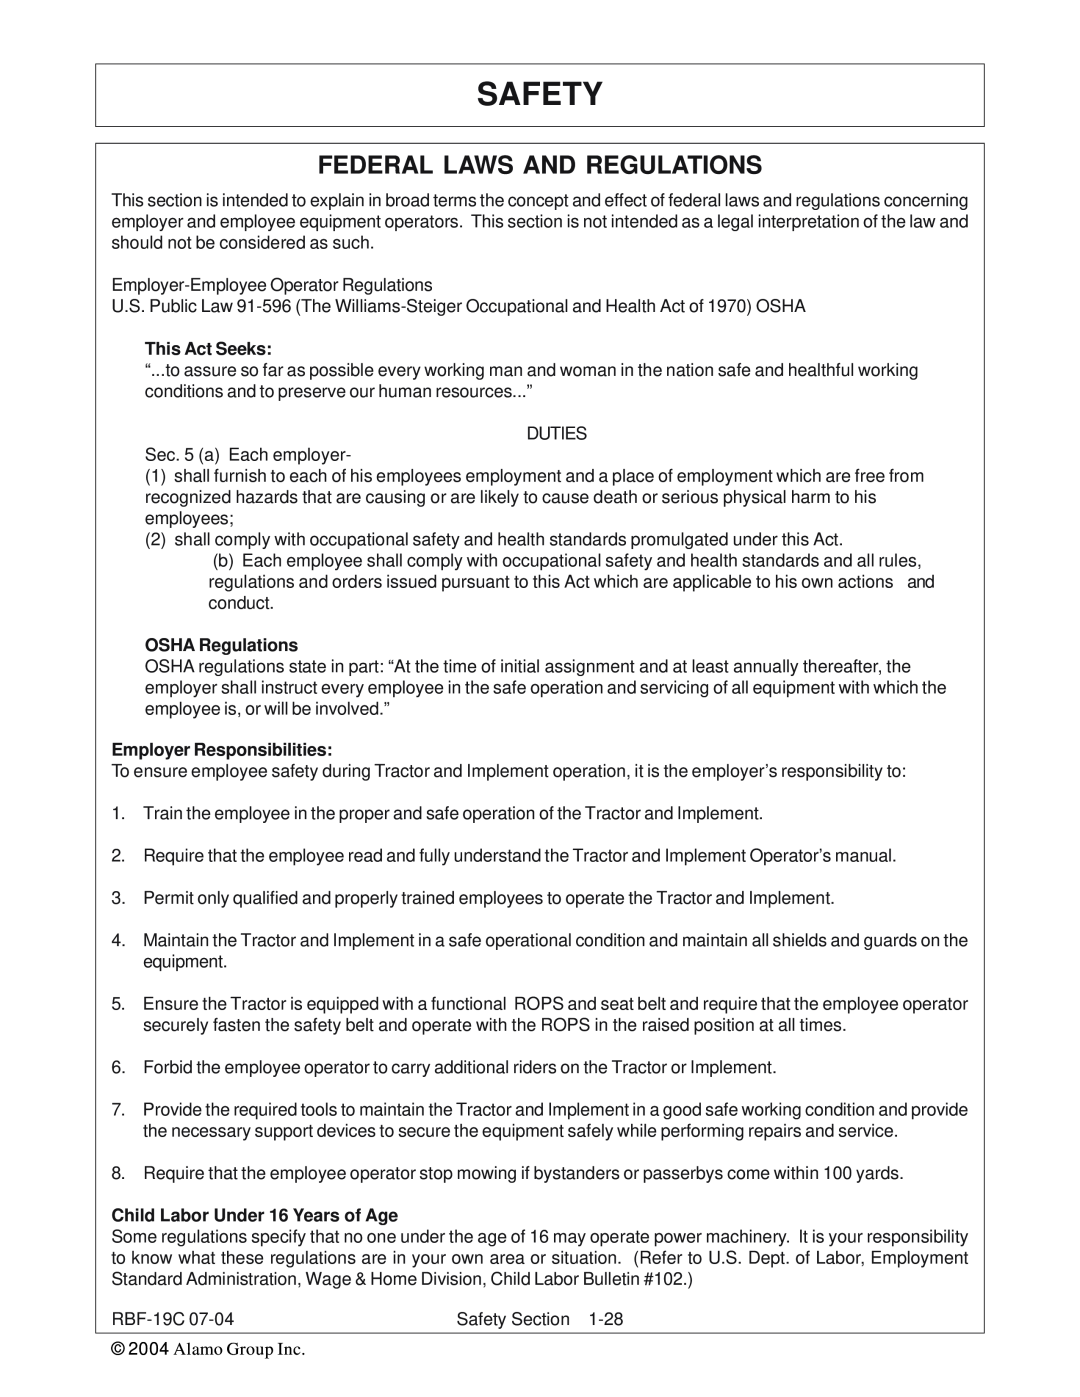 Tiger RBF-19C manual Safety, This Act Seeks, OSHA Regulations, Employer Responsibilities, Child Labor Under 16 Years of Age 